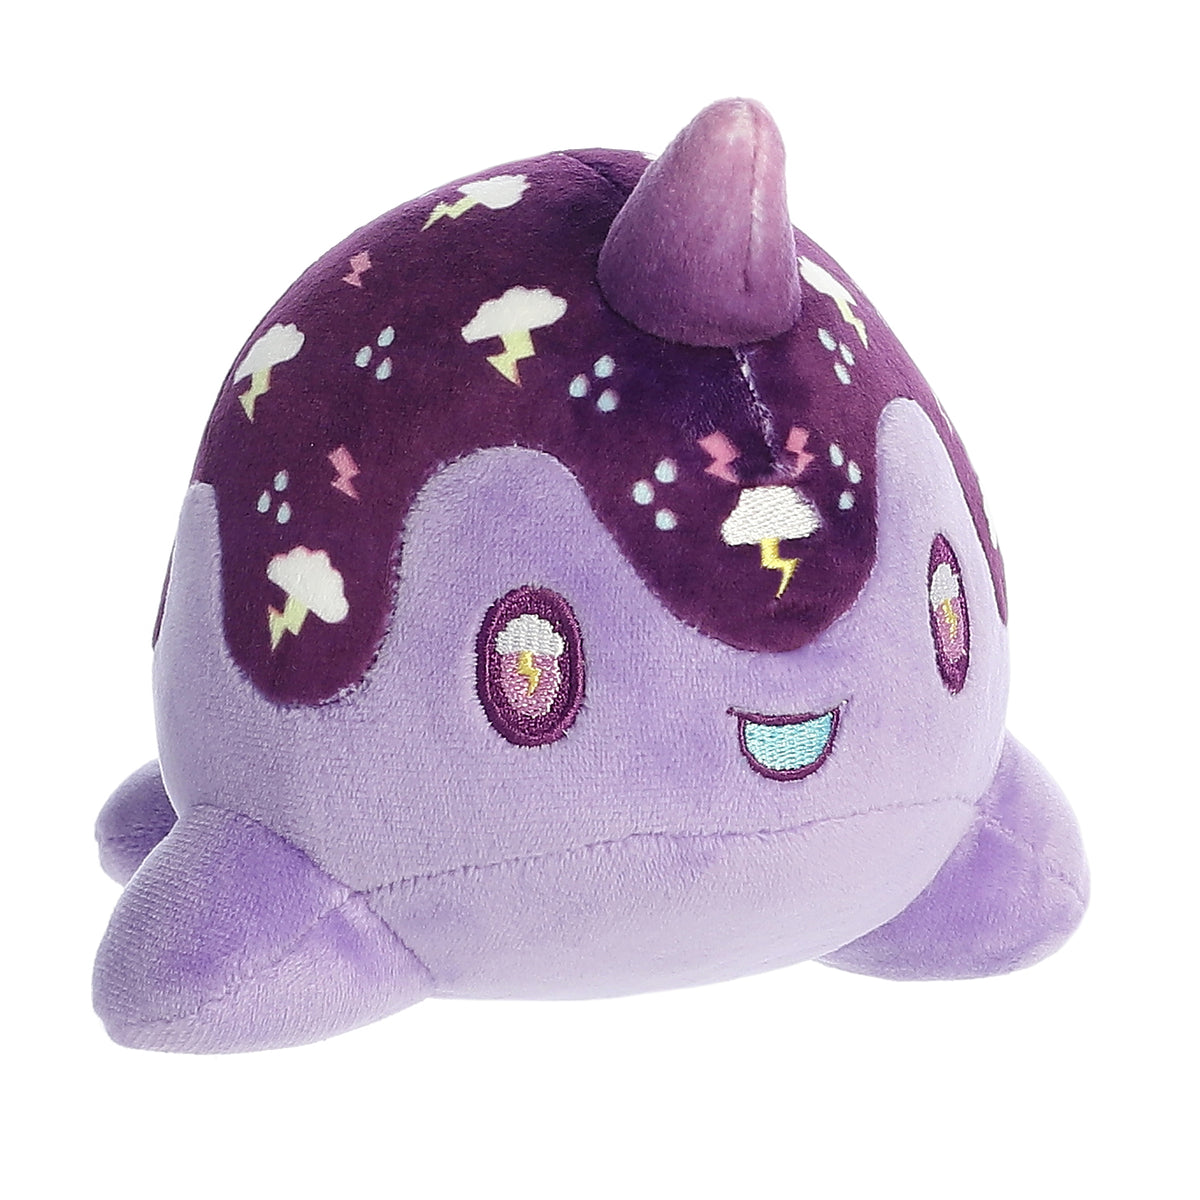 A blend of dark and light purple Tasty Peach Nomwhal plush that is an expressive narwhal with big sparkling embroidered eyes